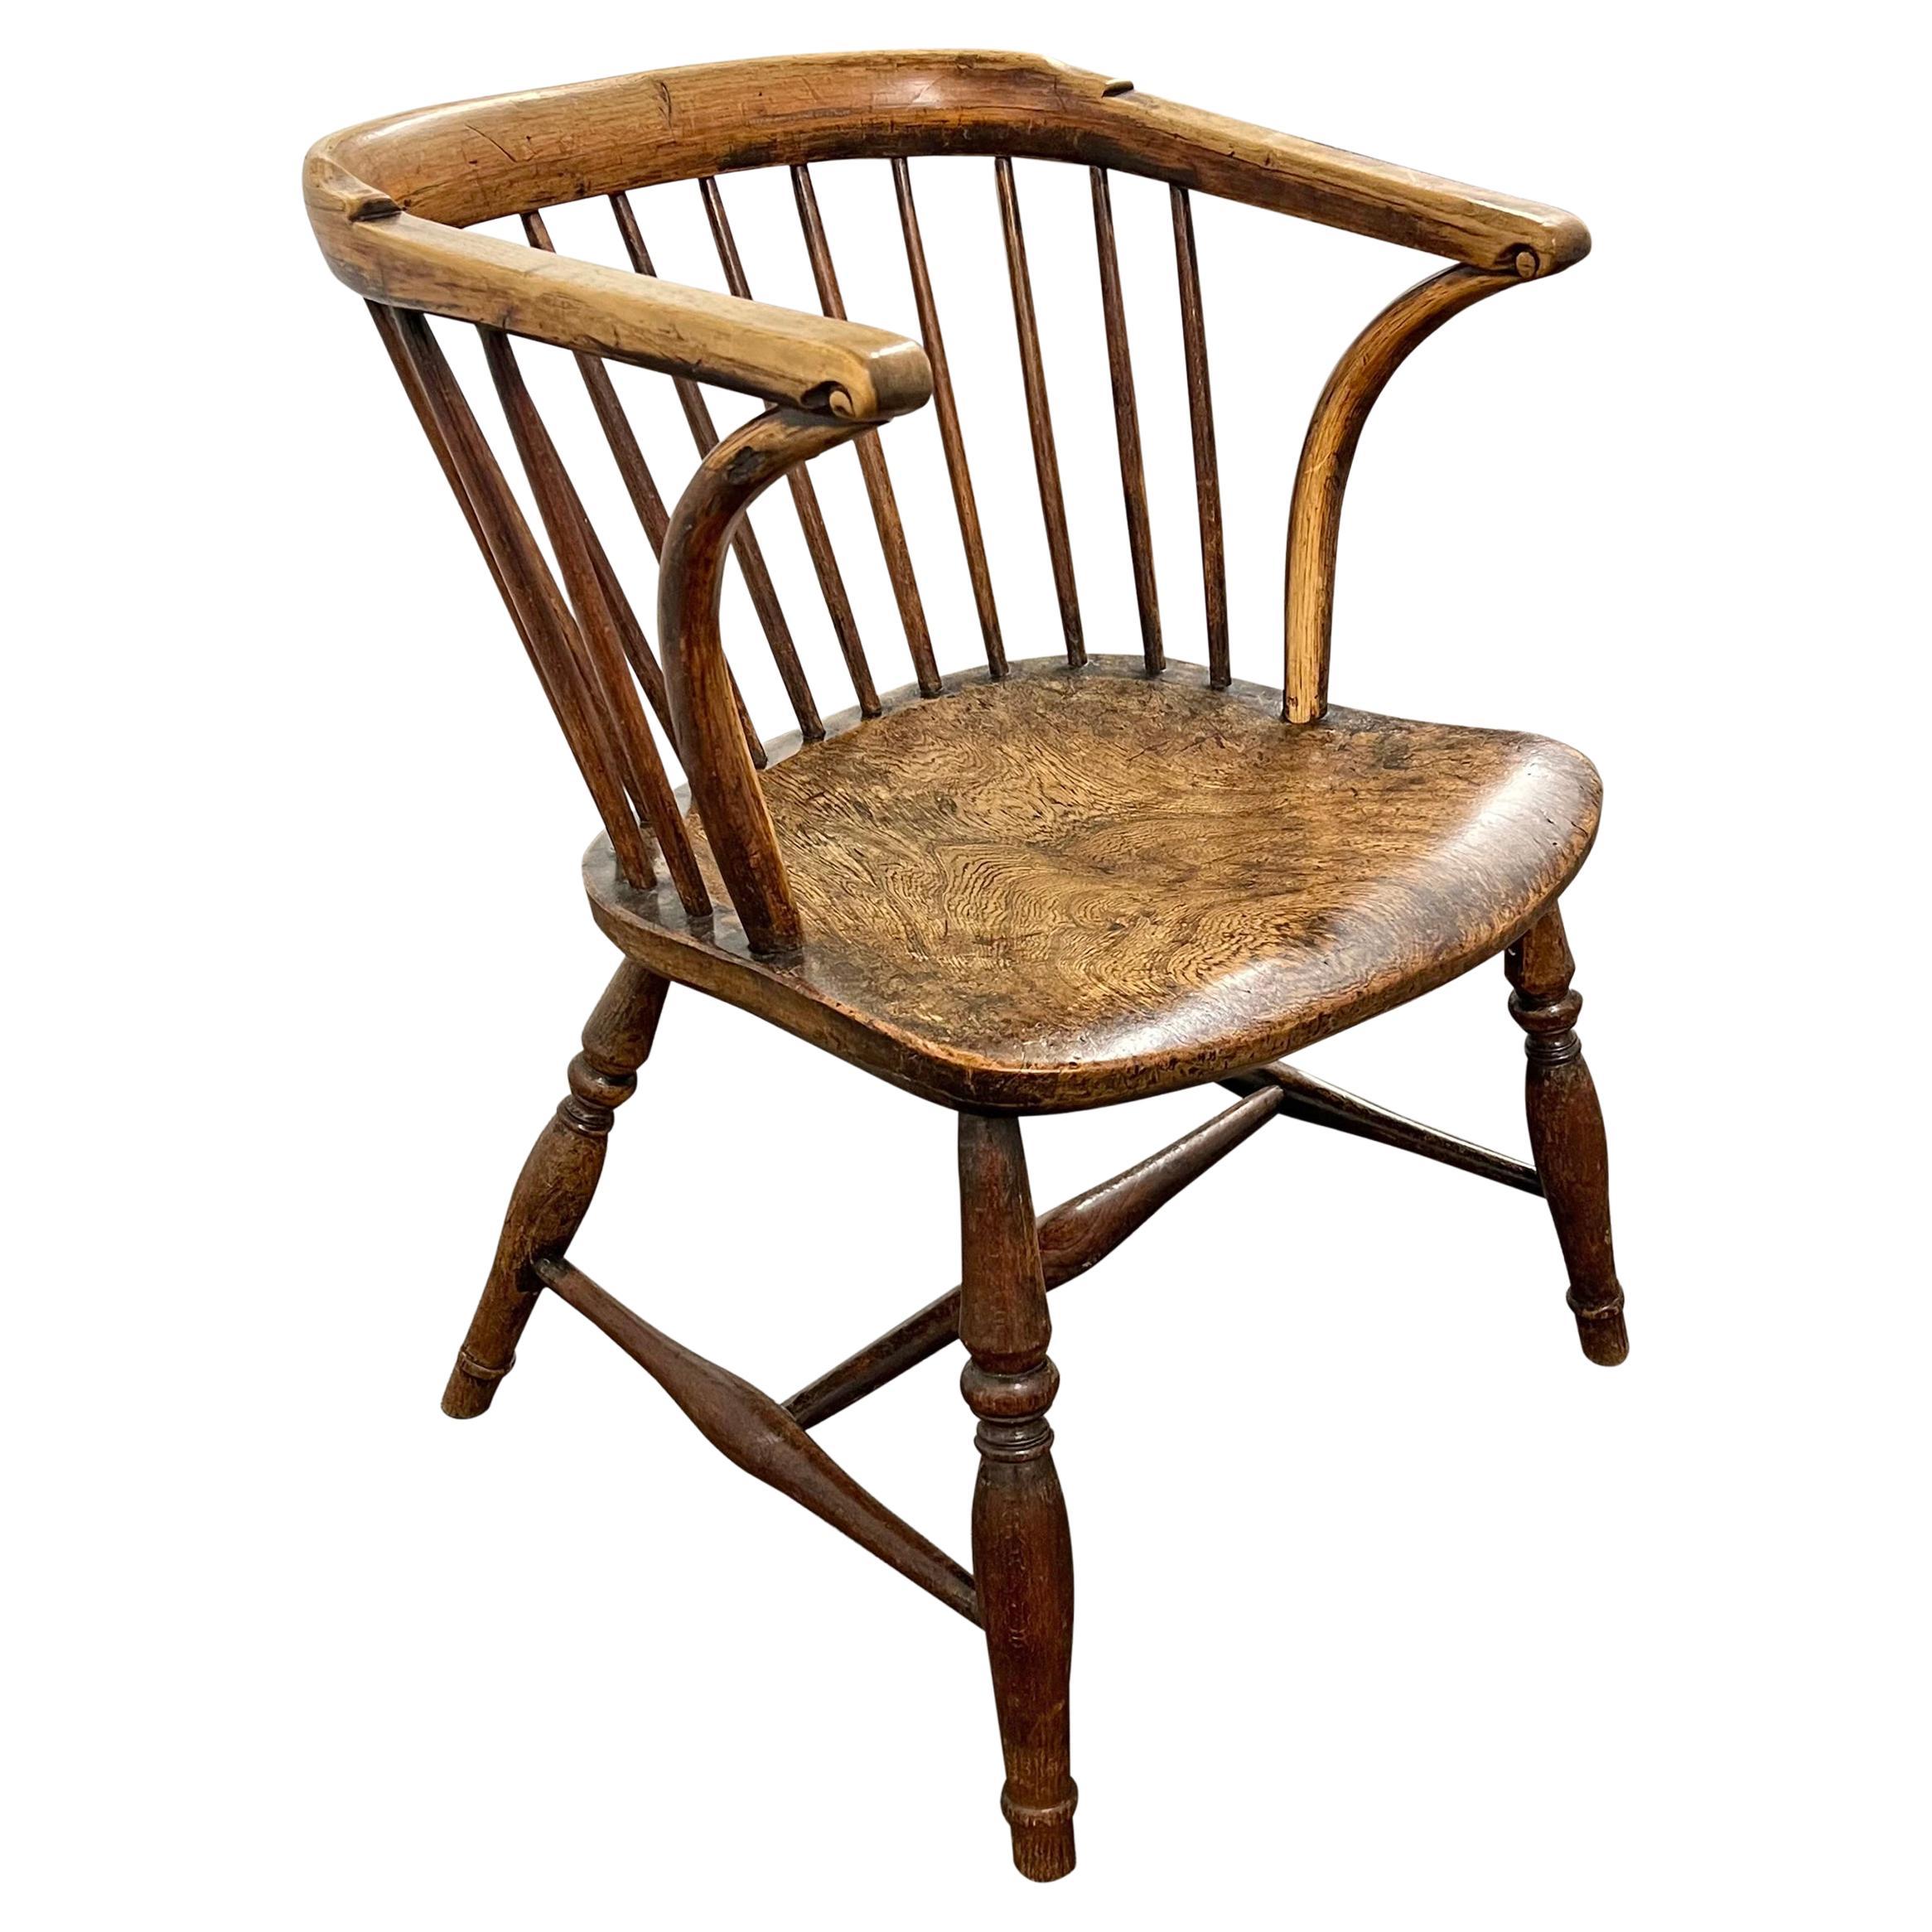 19th Century Low-Back Windsor Chair